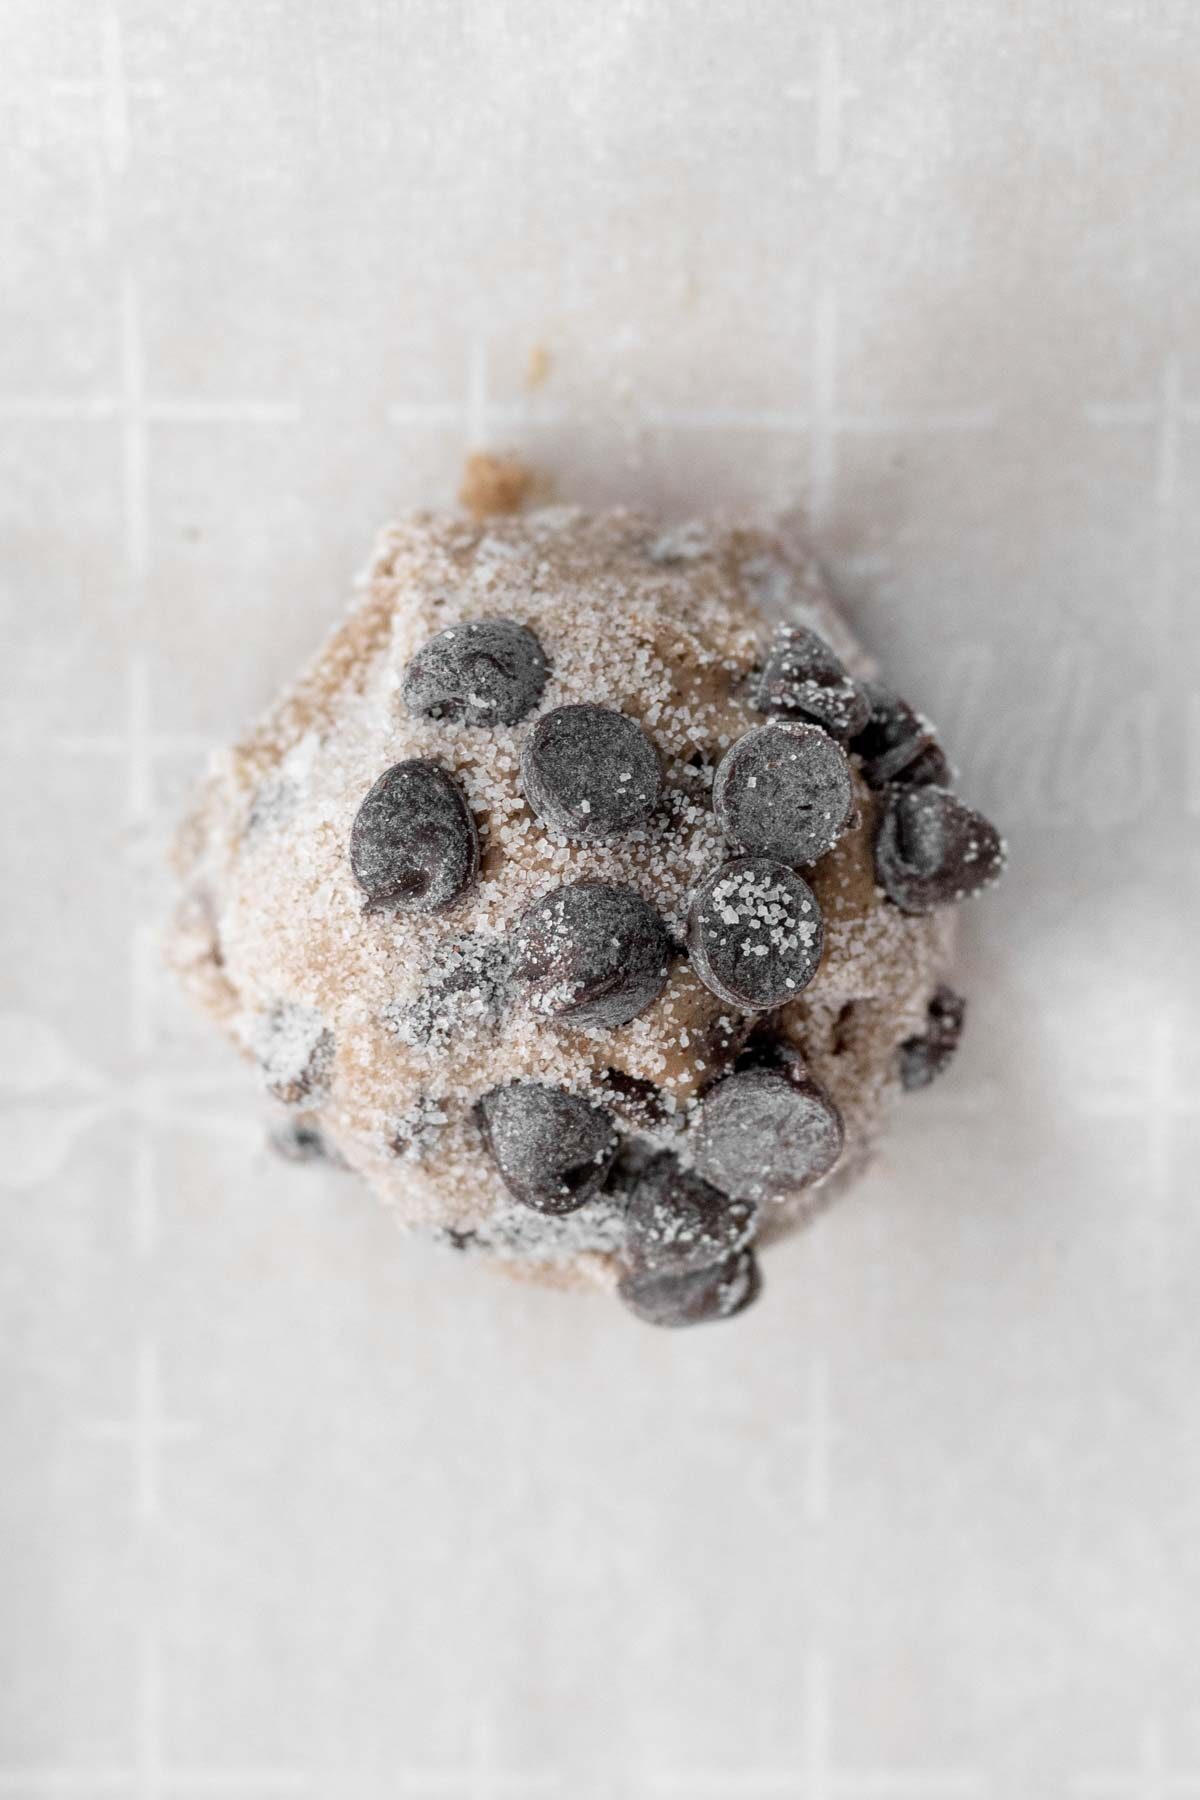 A ball of batter dusted with cinnamon sugar.